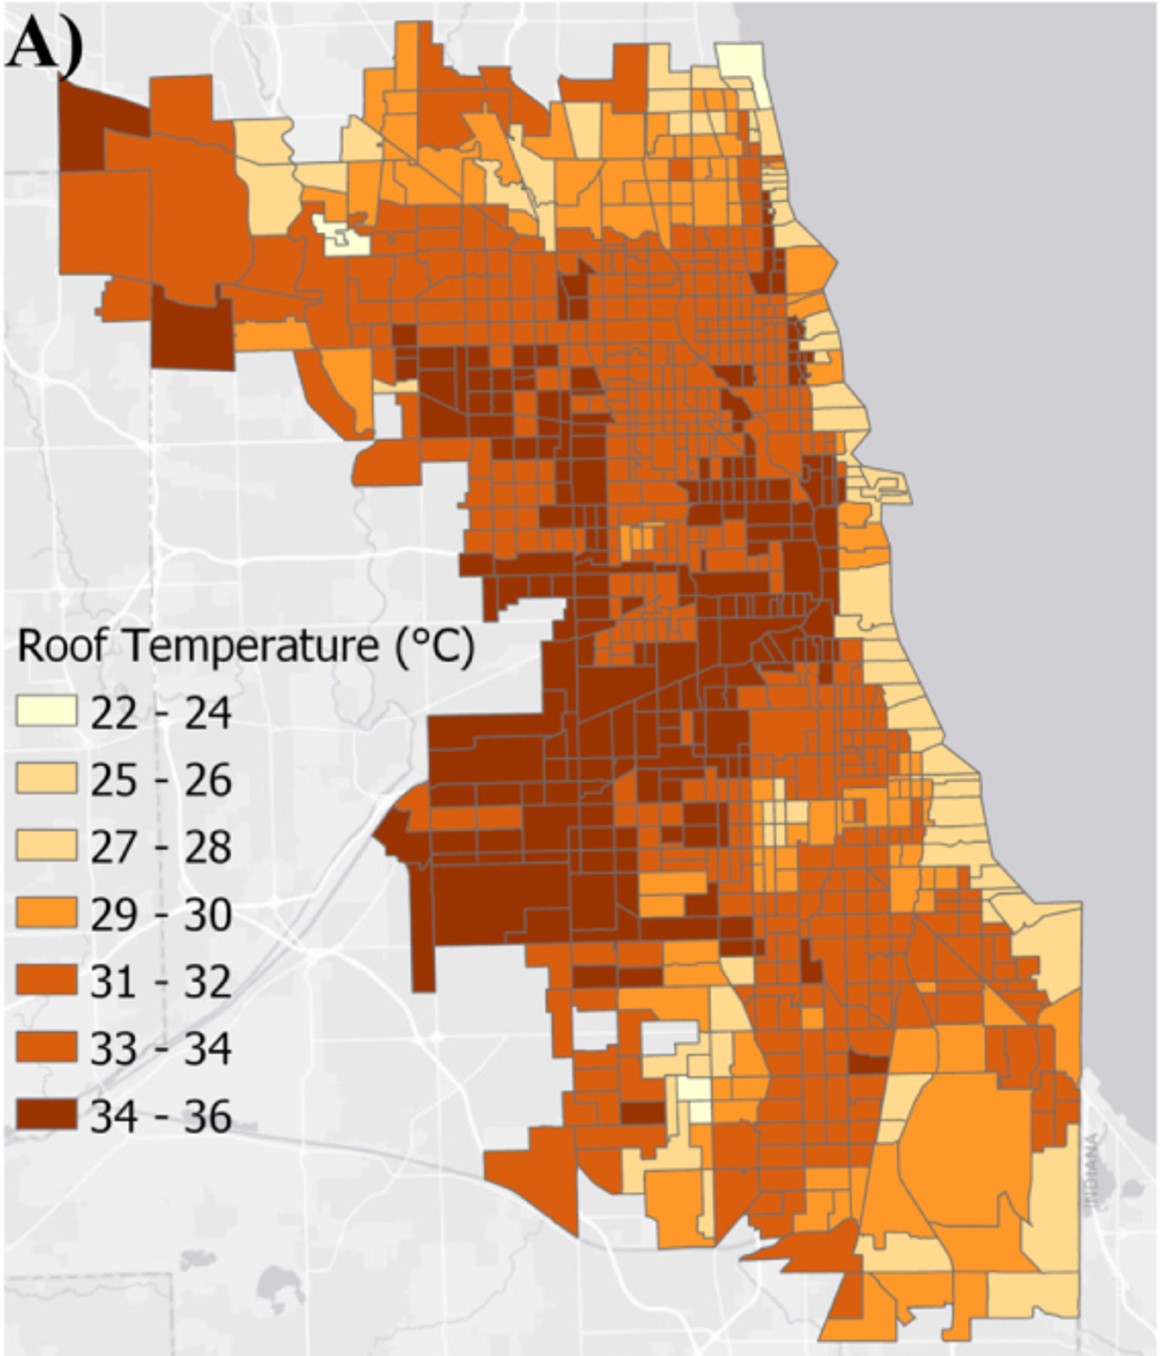 Map of average rooftop temperature by census tract in Chicago. The map shows the intensity of the urban heat island effect increasing temperatures in some neighborhoods relative to others.